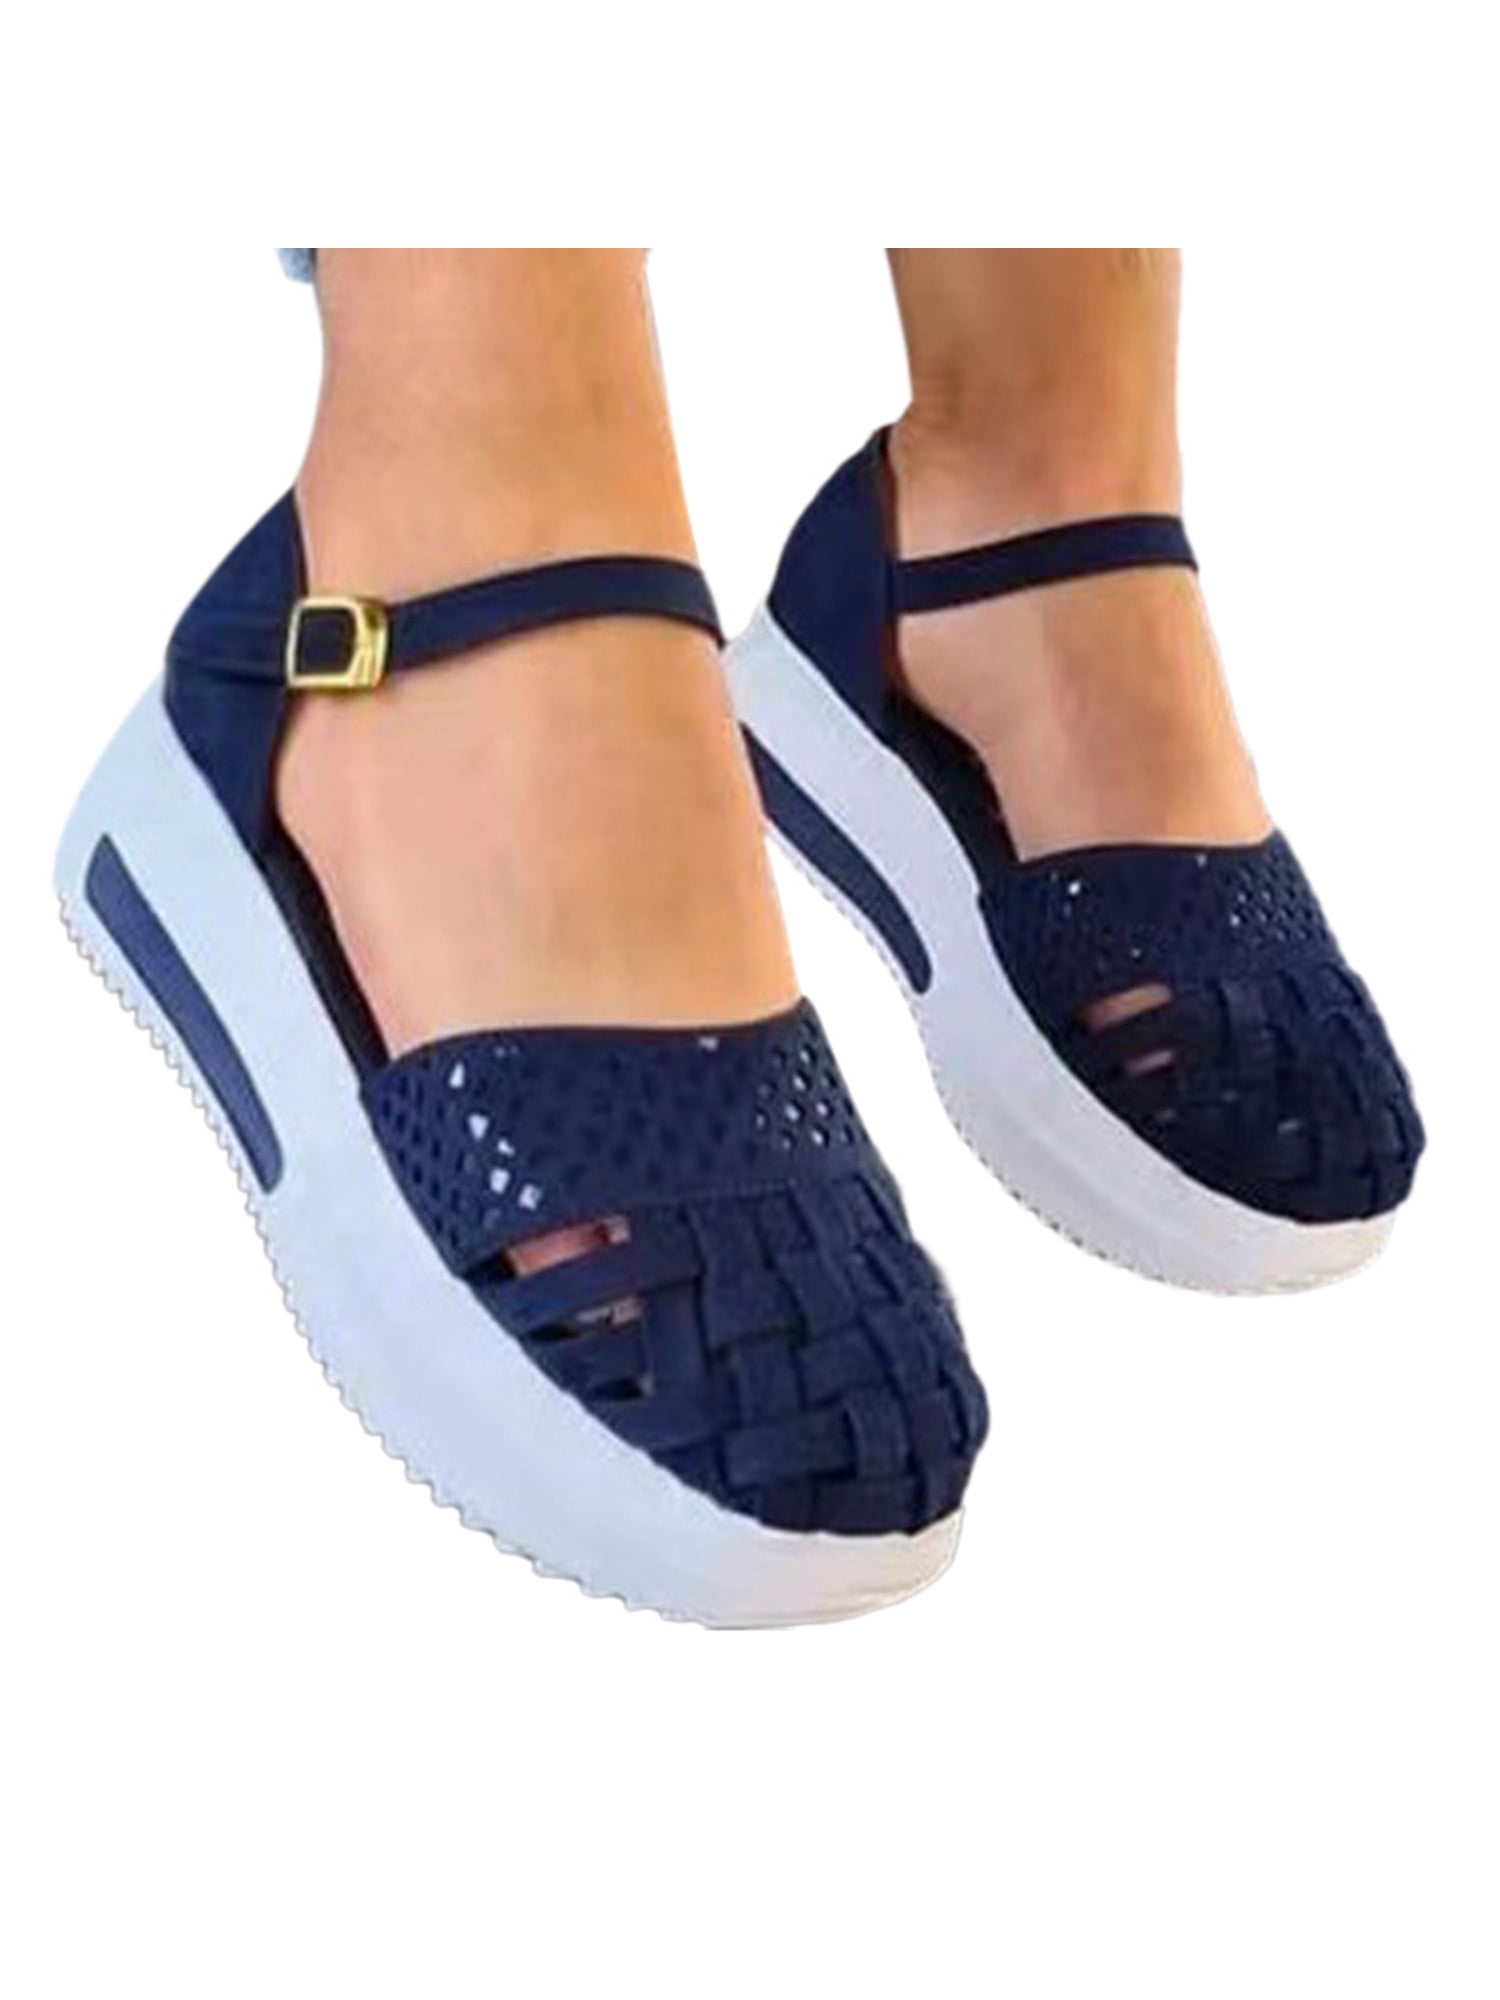 Ladies MARY navy wedge slippers by FOUR SEASONS Retail £9.99 